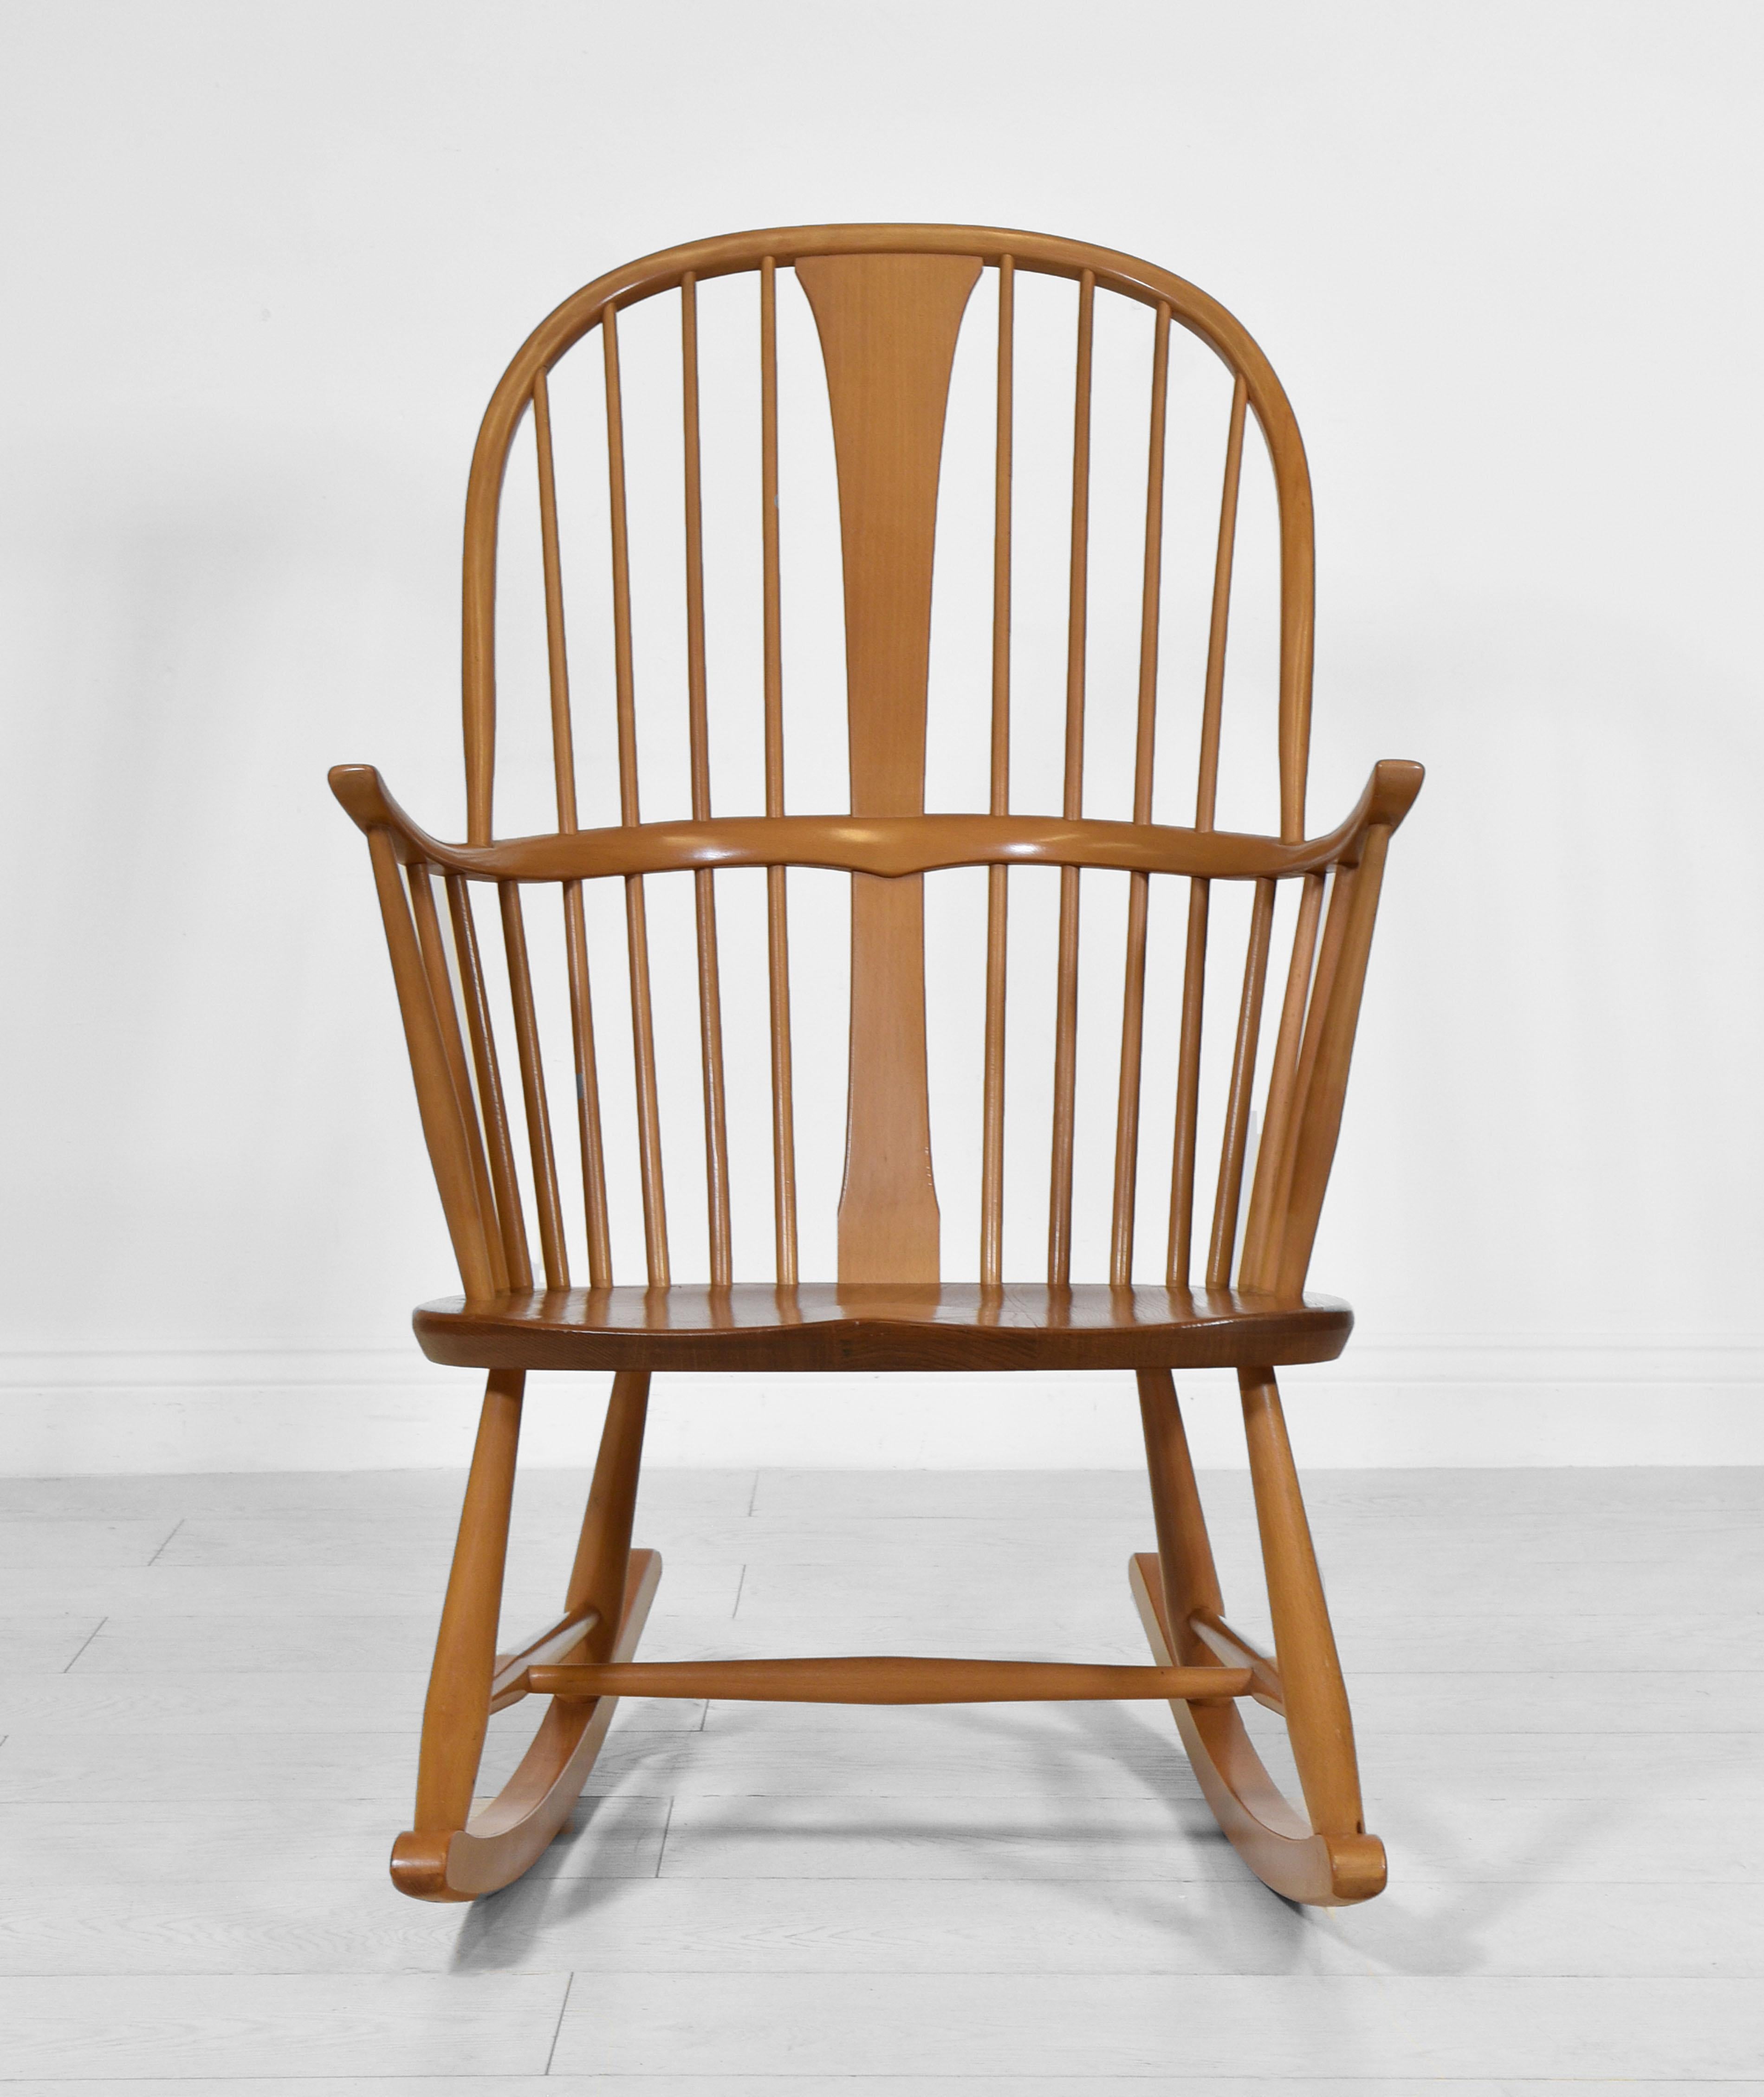 A vintage Ercol Windsor double bow rocking chair, designed by Lucian Ercolani and launched in 1962. Blue foil maker's label. Circa 1970.

Showing all the quality craftsmanship used by this company, the rocking chair has its original finish, which